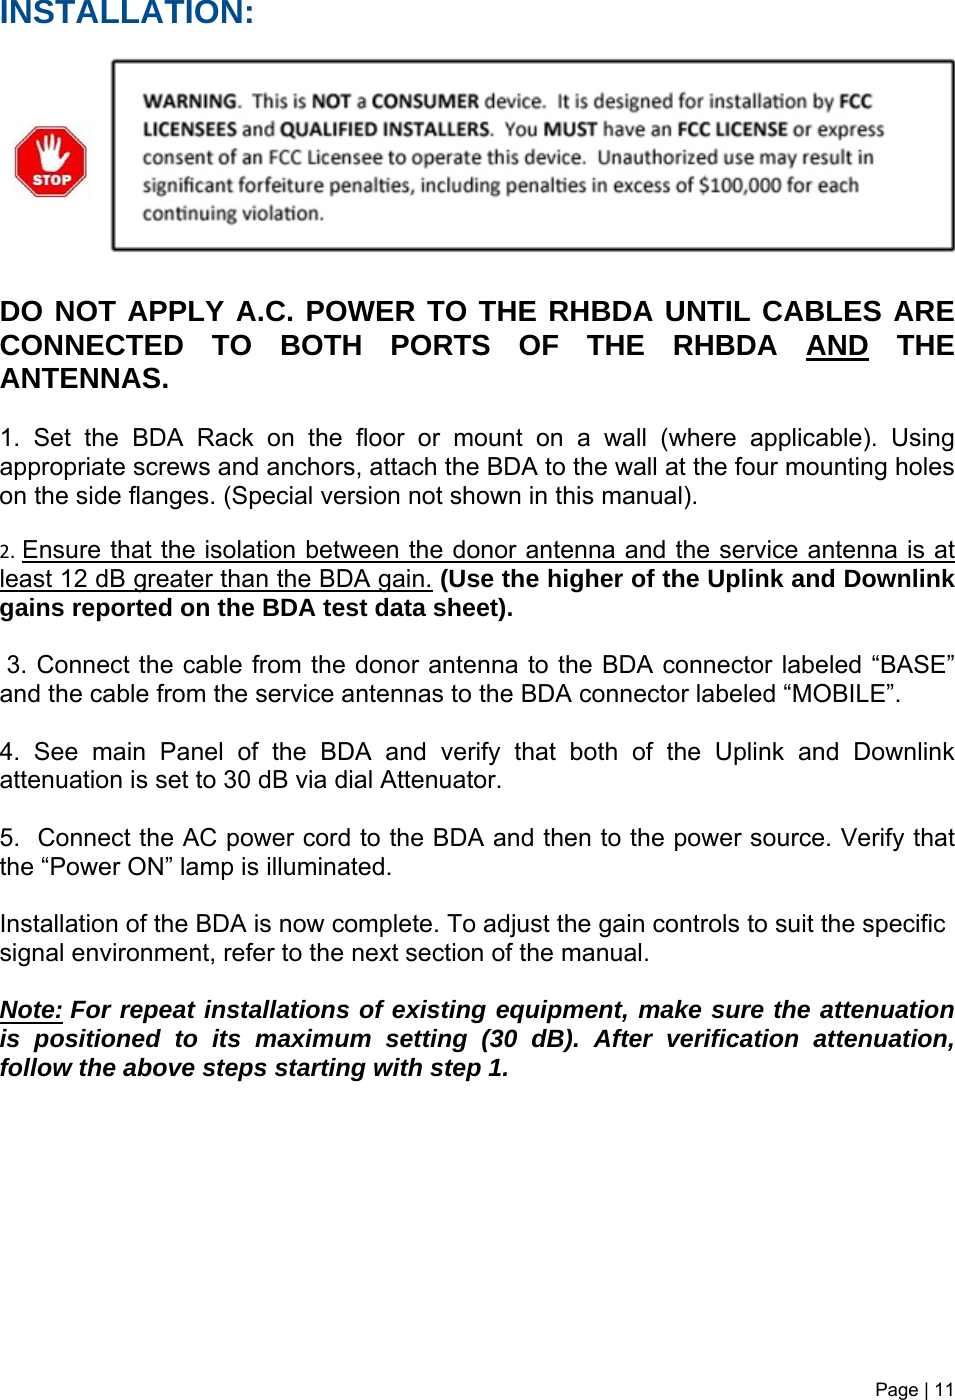 INSTALLATION:         DO NOT APPLY A.C. POWER TO THE RHBDA UNTIL CABLES ARE CONNECTED TO BOTH PORTS OF THE RHBDA AND THE ANTENNAS.   1. Set the BDA Rack on the floor or mount on a wall (where applicable). Using appropriate screws and anchors, attach the BDA to the wall at the four mounting holes on the side flanges. (Special version not shown in this manual). 2.Ensure that the isolation between the donor antenna and the service antenna is at least 12 dB greater than the BDA gain. (Use the higher of the Uplink and Downlink gains reported on the BDA test data sheet).  3. Connect the cable from the donor antenna to the BDA connector labeled “BASE” and the cable from the service antennas to the BDA connector labeled “MOBILE”.  4. See main Panel of the BDA and verify that both of the Uplink and Downlink attenuation is set to 30 dB via dial Attenuator.    5.  Connect the AC power cord to the BDA and then to the power source. Verify that the “Power ON” lamp is illuminated.   Installation of the BDA is now complete. To adjust the gain controls to suit the specific signal environment, refer to the next section of the manual.  Note:For repeat installations of existing equipment, make sure the attenuation is positioned to its maximum setting (30 dB). After verification attenuation, follow the above steps starting with step 1.           Page | 11   